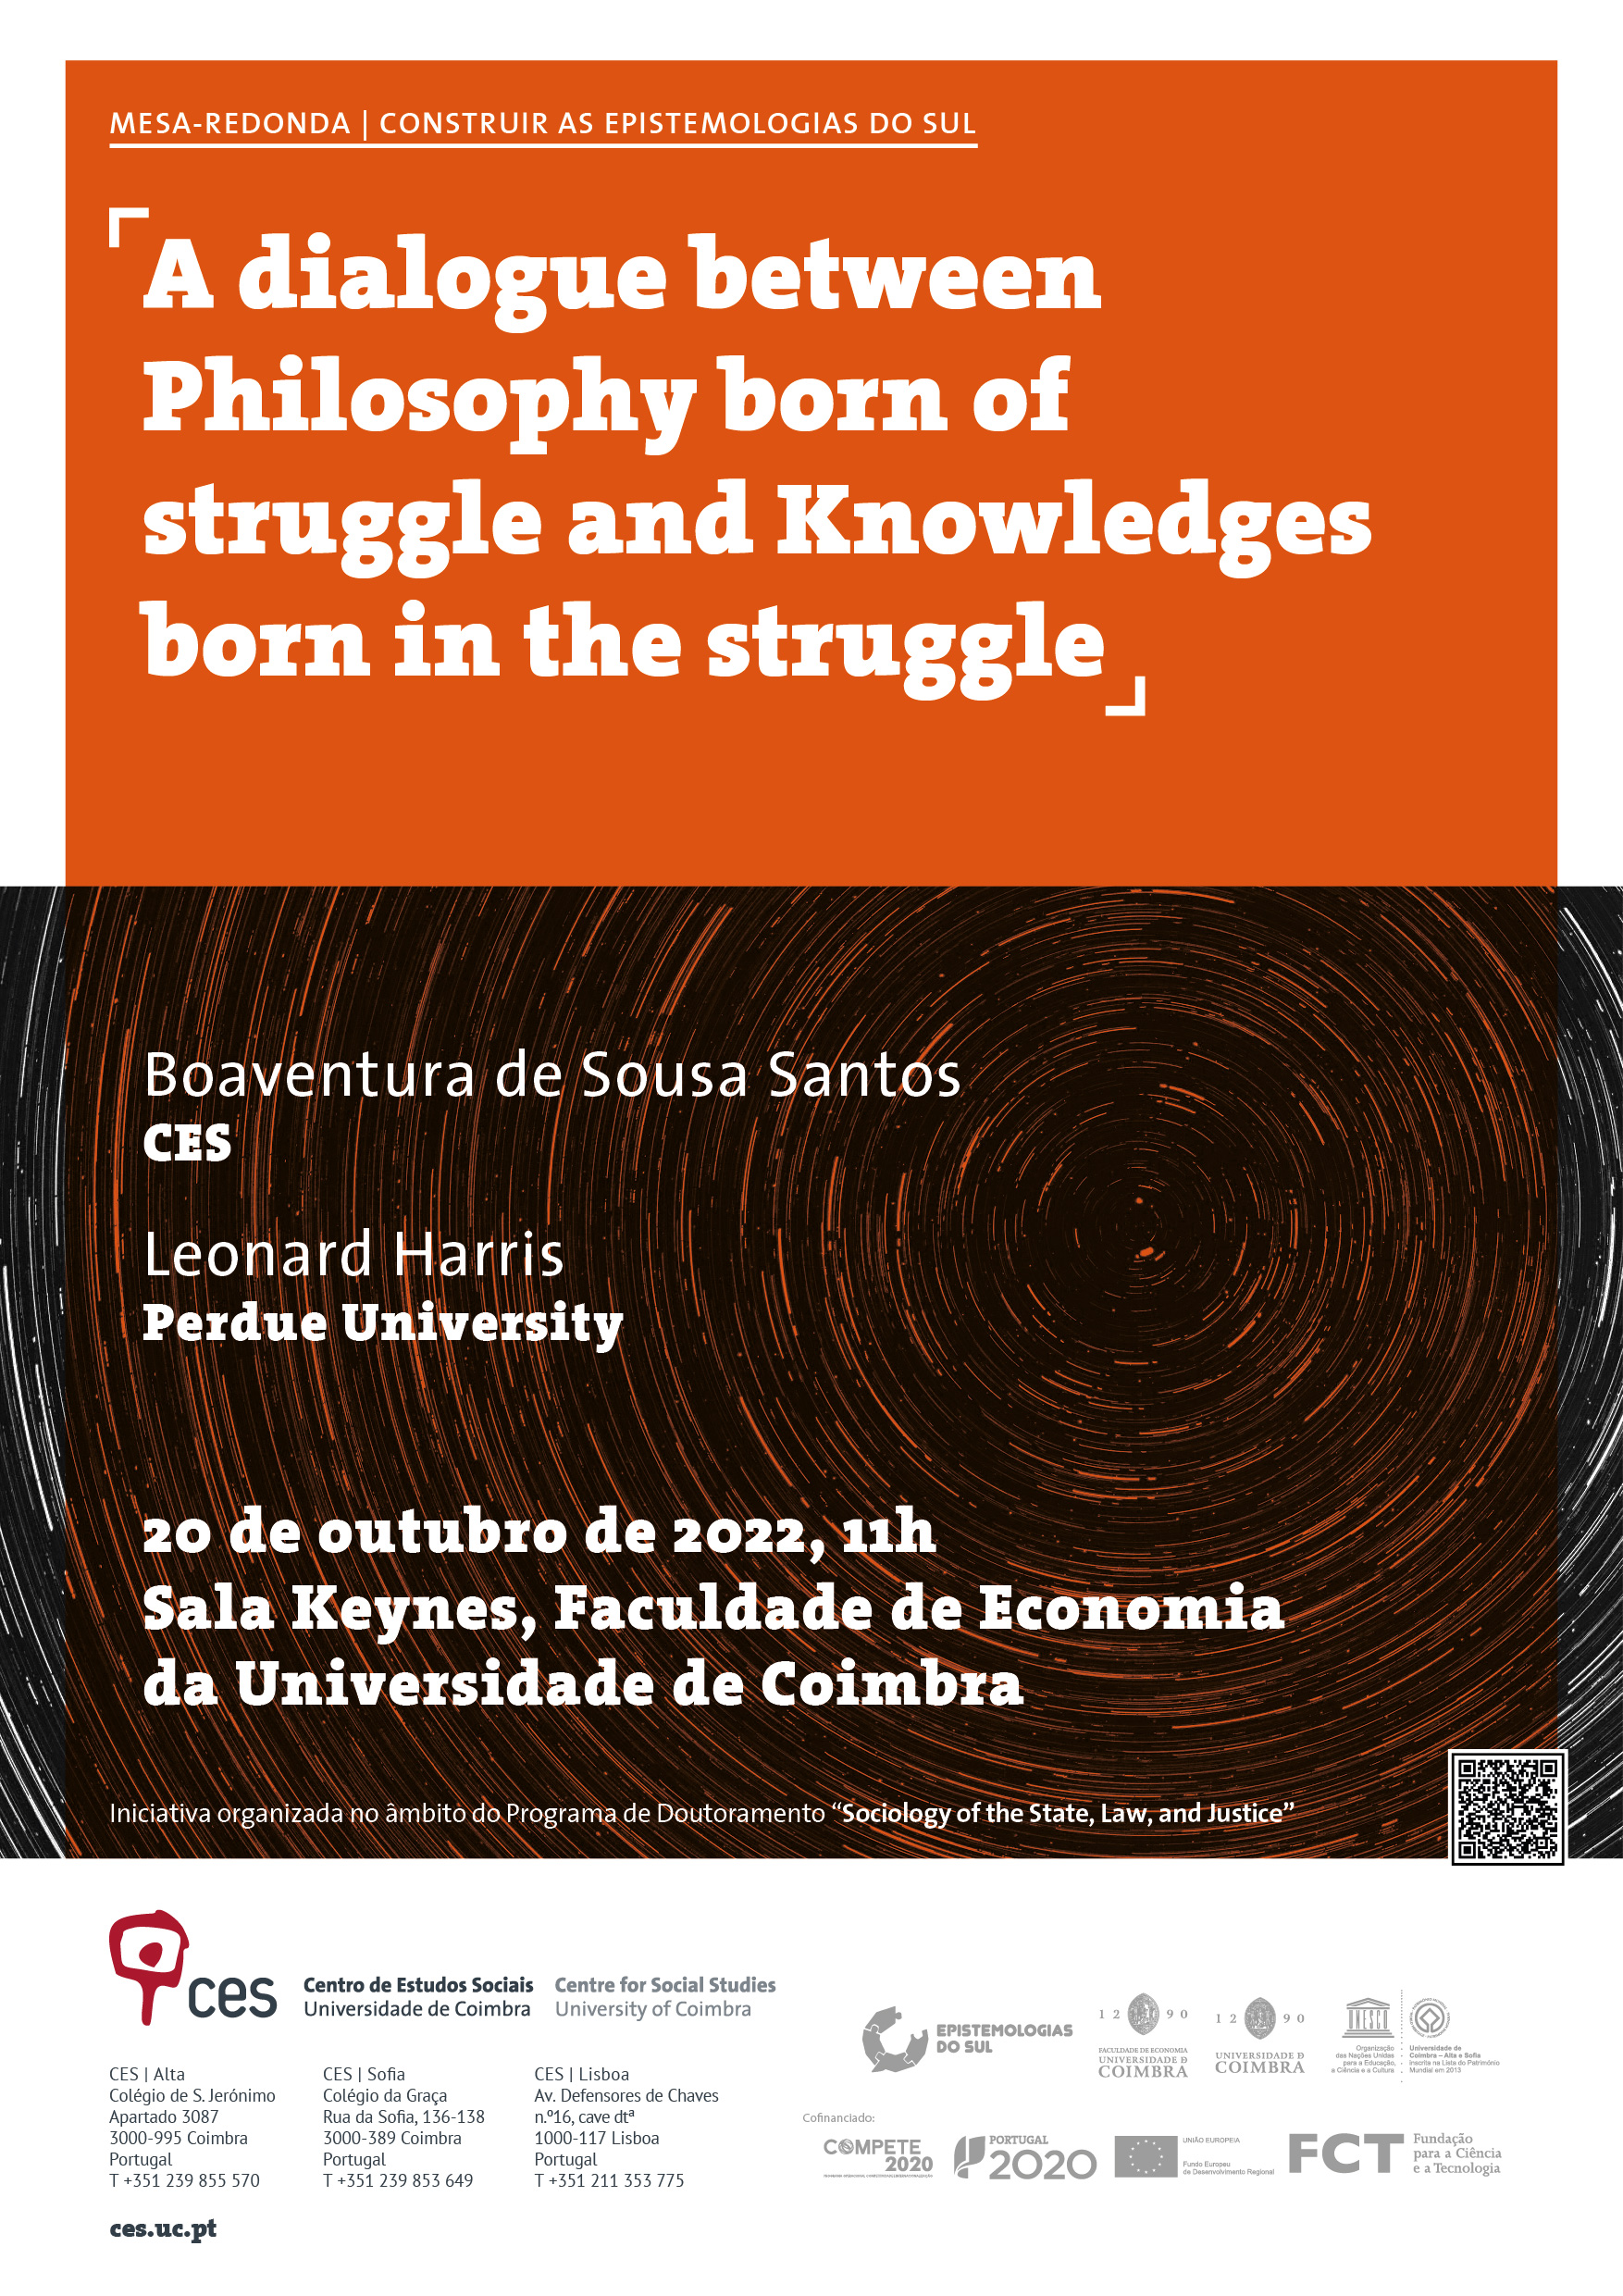 A dialogue between Philosophy born of struggle and Knowledges born in the struggle<span id="edit_40325"><script>$(function() { $('#edit_40325').load( "/myces/user/editobj.php?tipo=evento&id=40325" ); });</script></span>